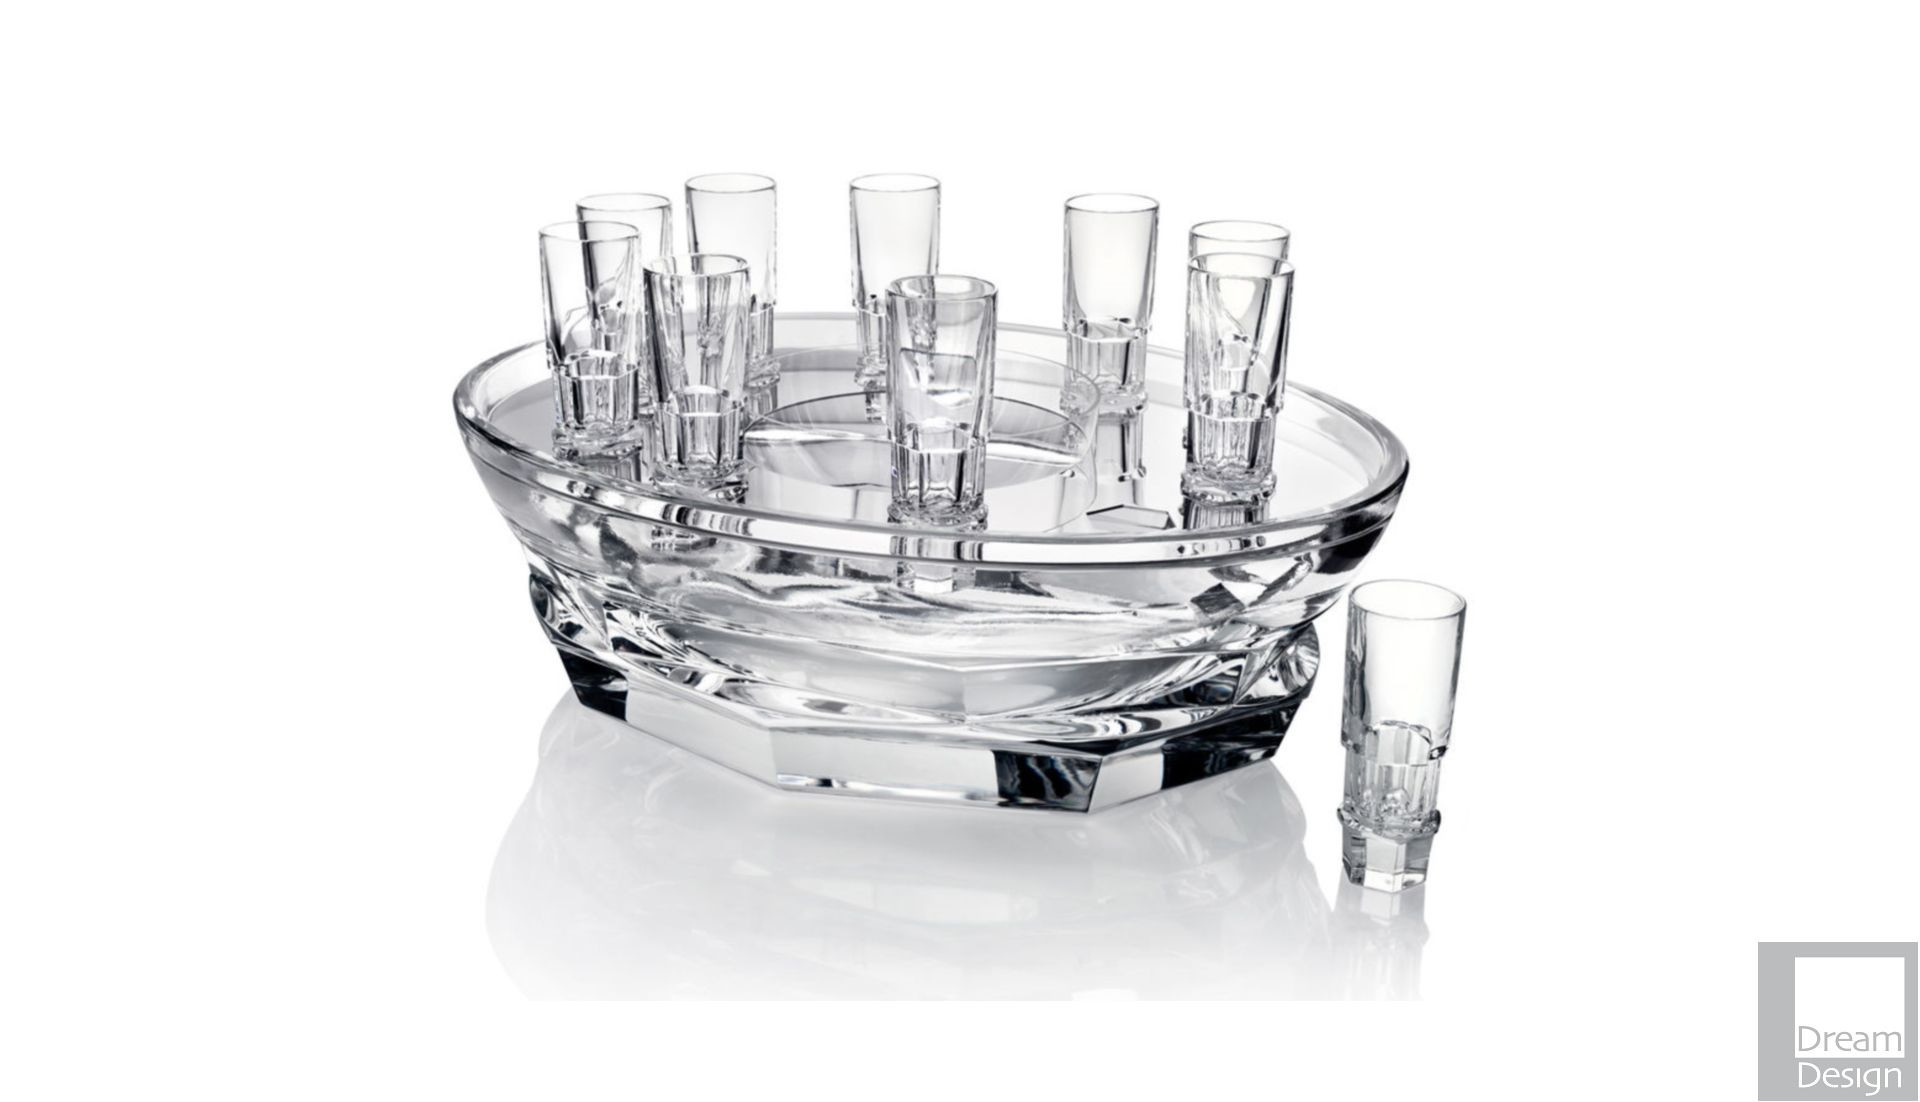 baccarat crystal vase prices of baccarat abysee caviar set the bowls stunning flat cuts are pertaining to baccarat abysee caviar set the bowls stunning flat cuts are anchored by the hexagonal motif the signature of the harcourt abysse collection